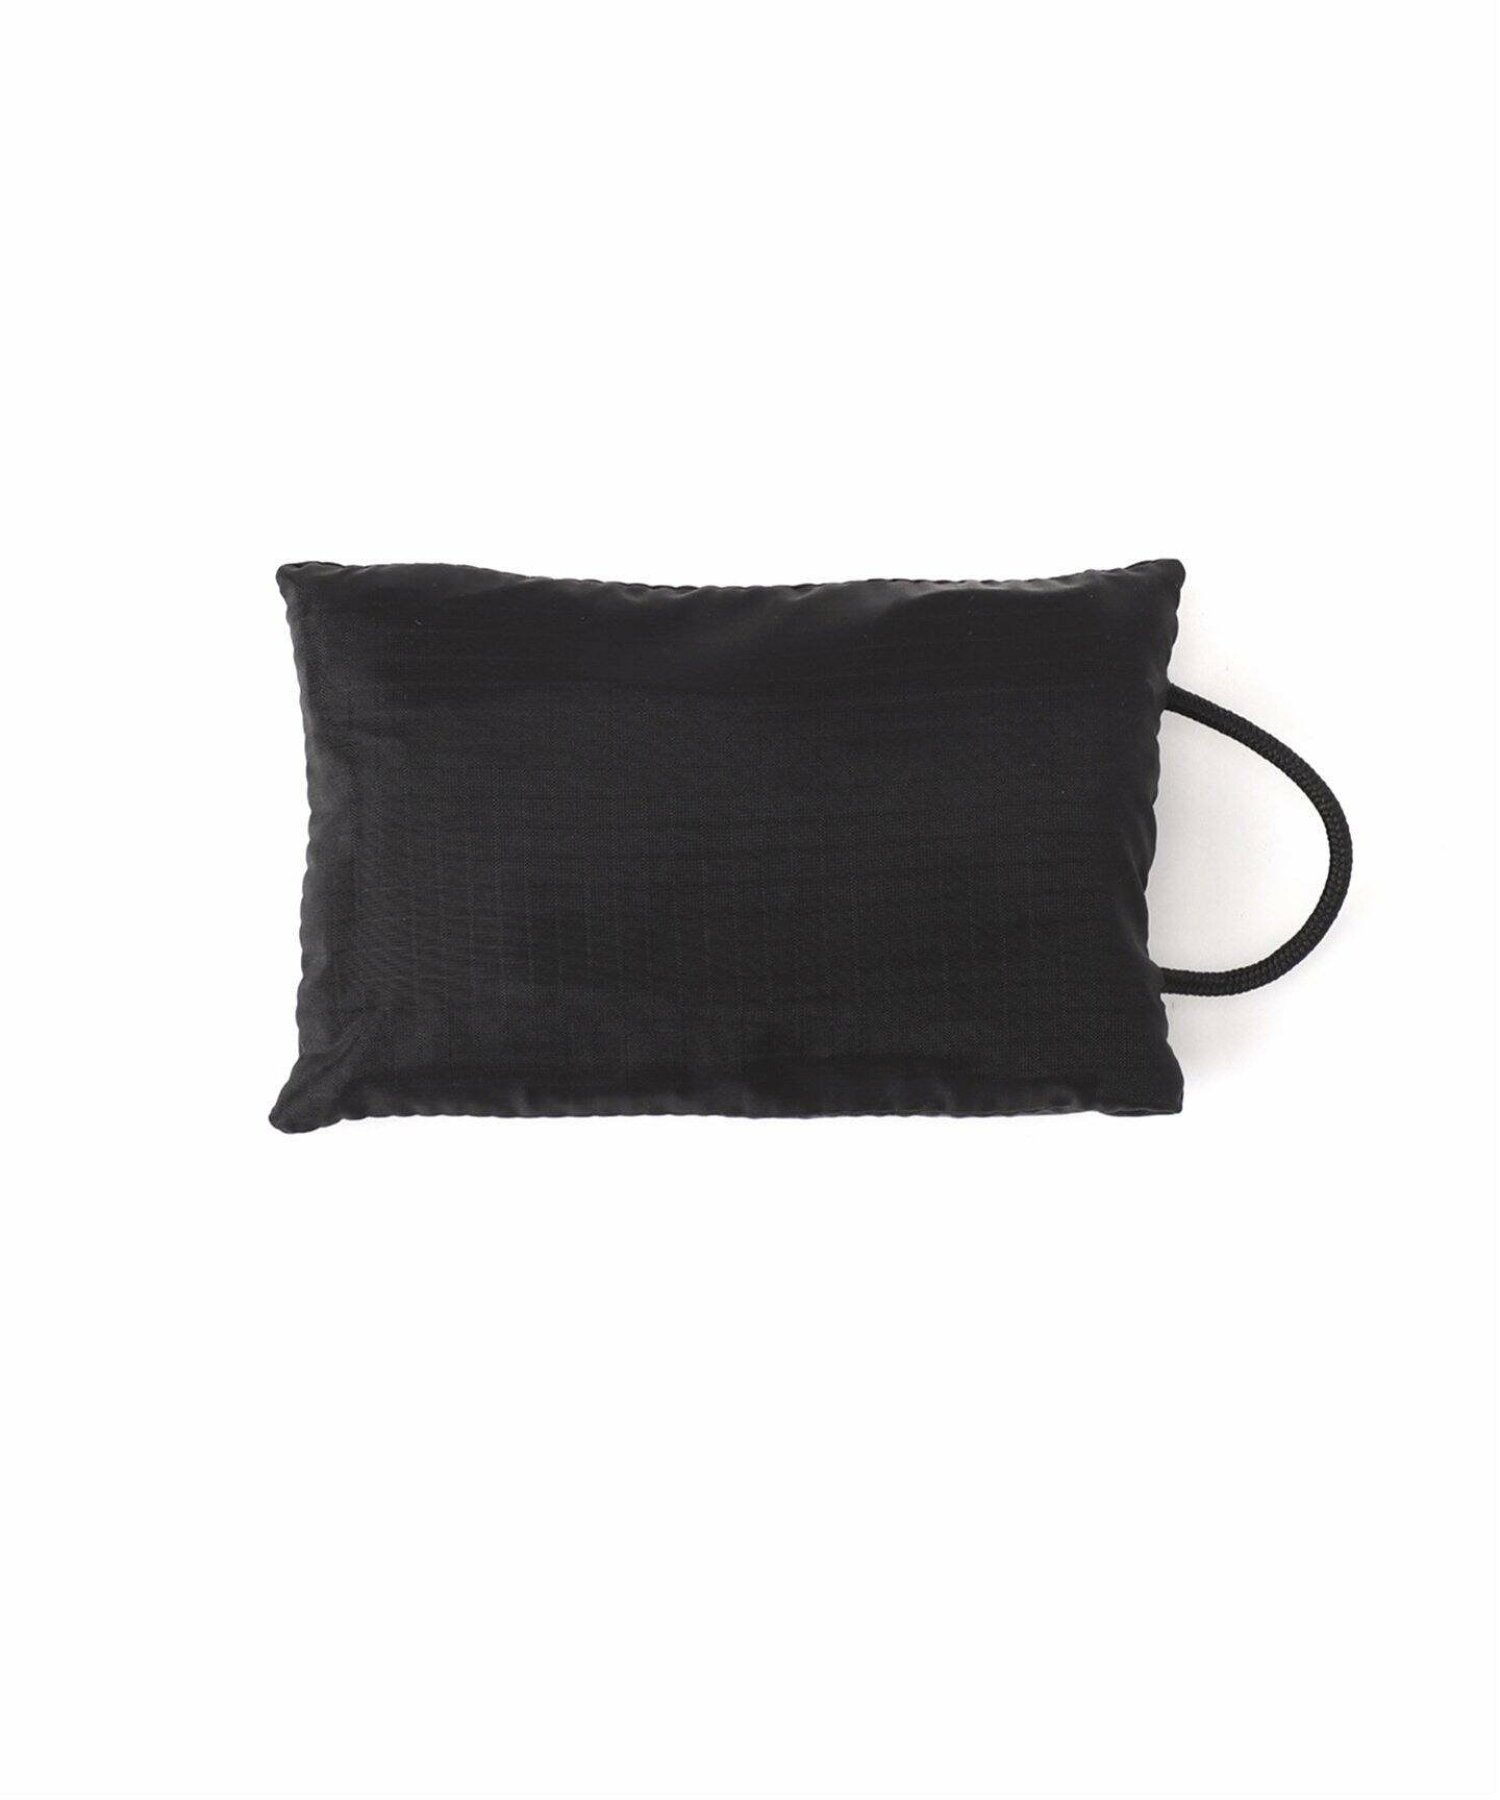 《WEB限定》【THE NORTH FACE/ ザノースフェイス】 Mayfly Hip Pouch